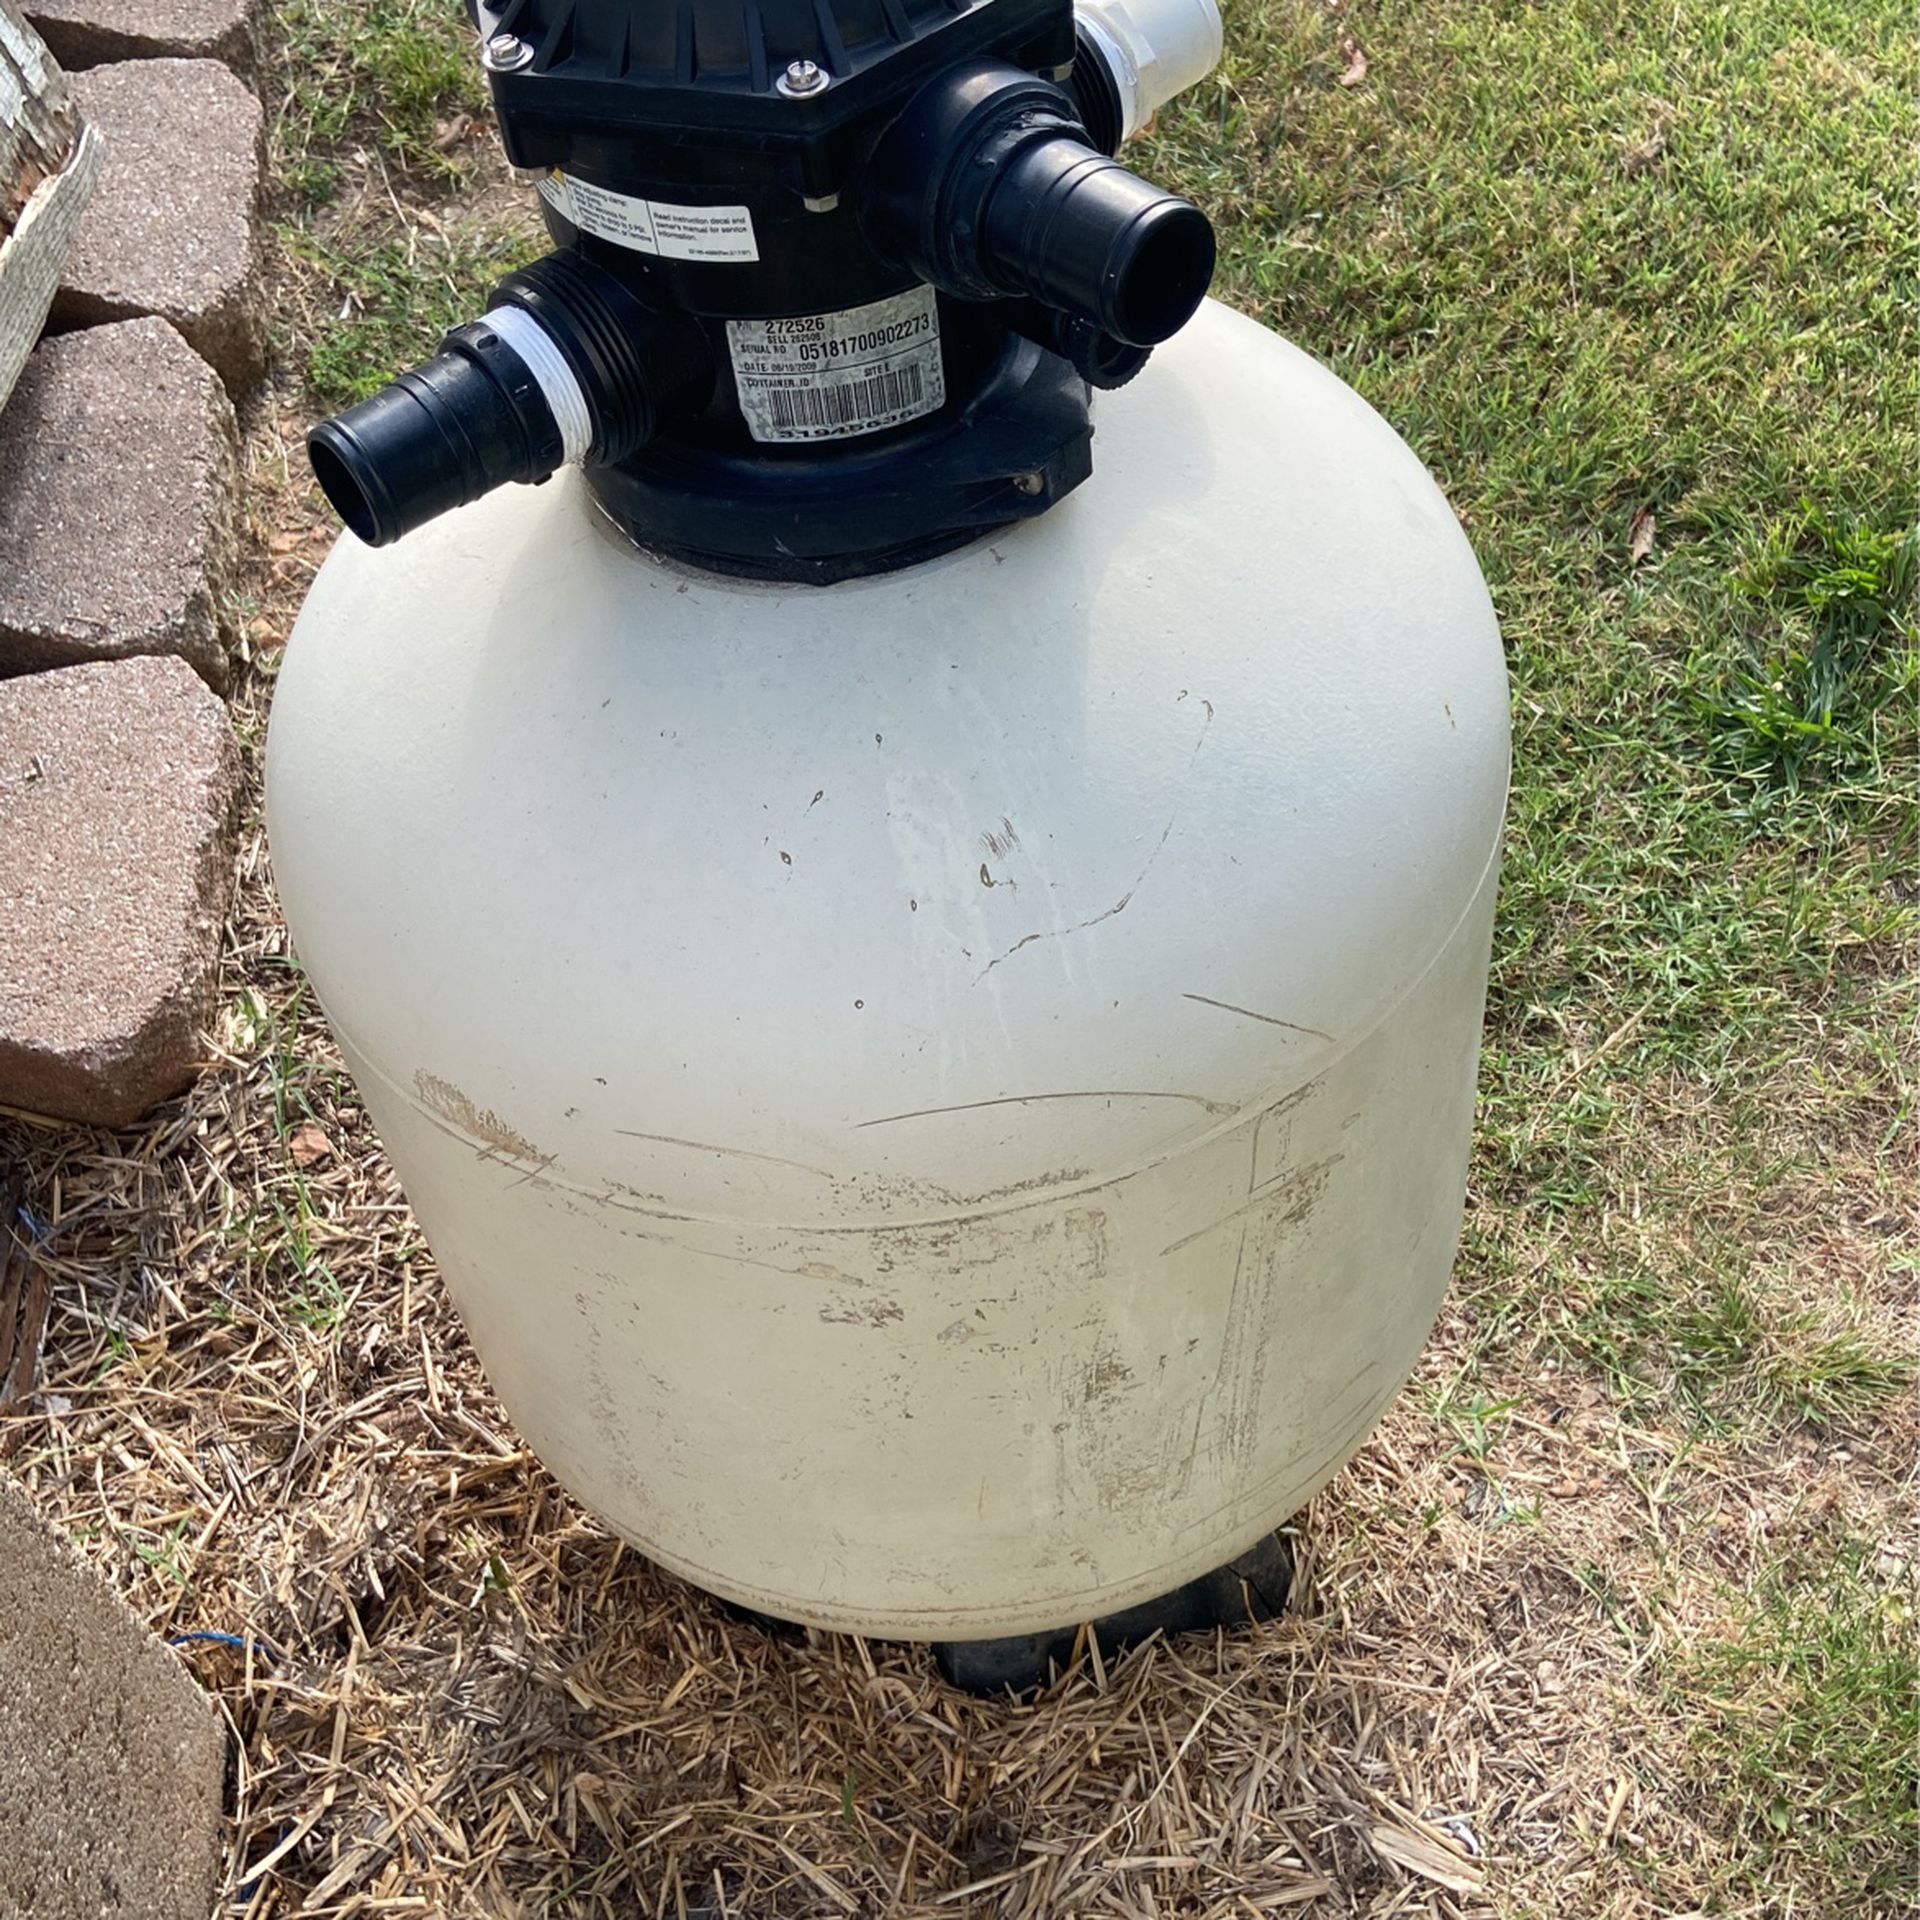 Tagelus High Rate Sand Filter For Swimming Pools Or Spas Residential Or Public Use. Make Offer!